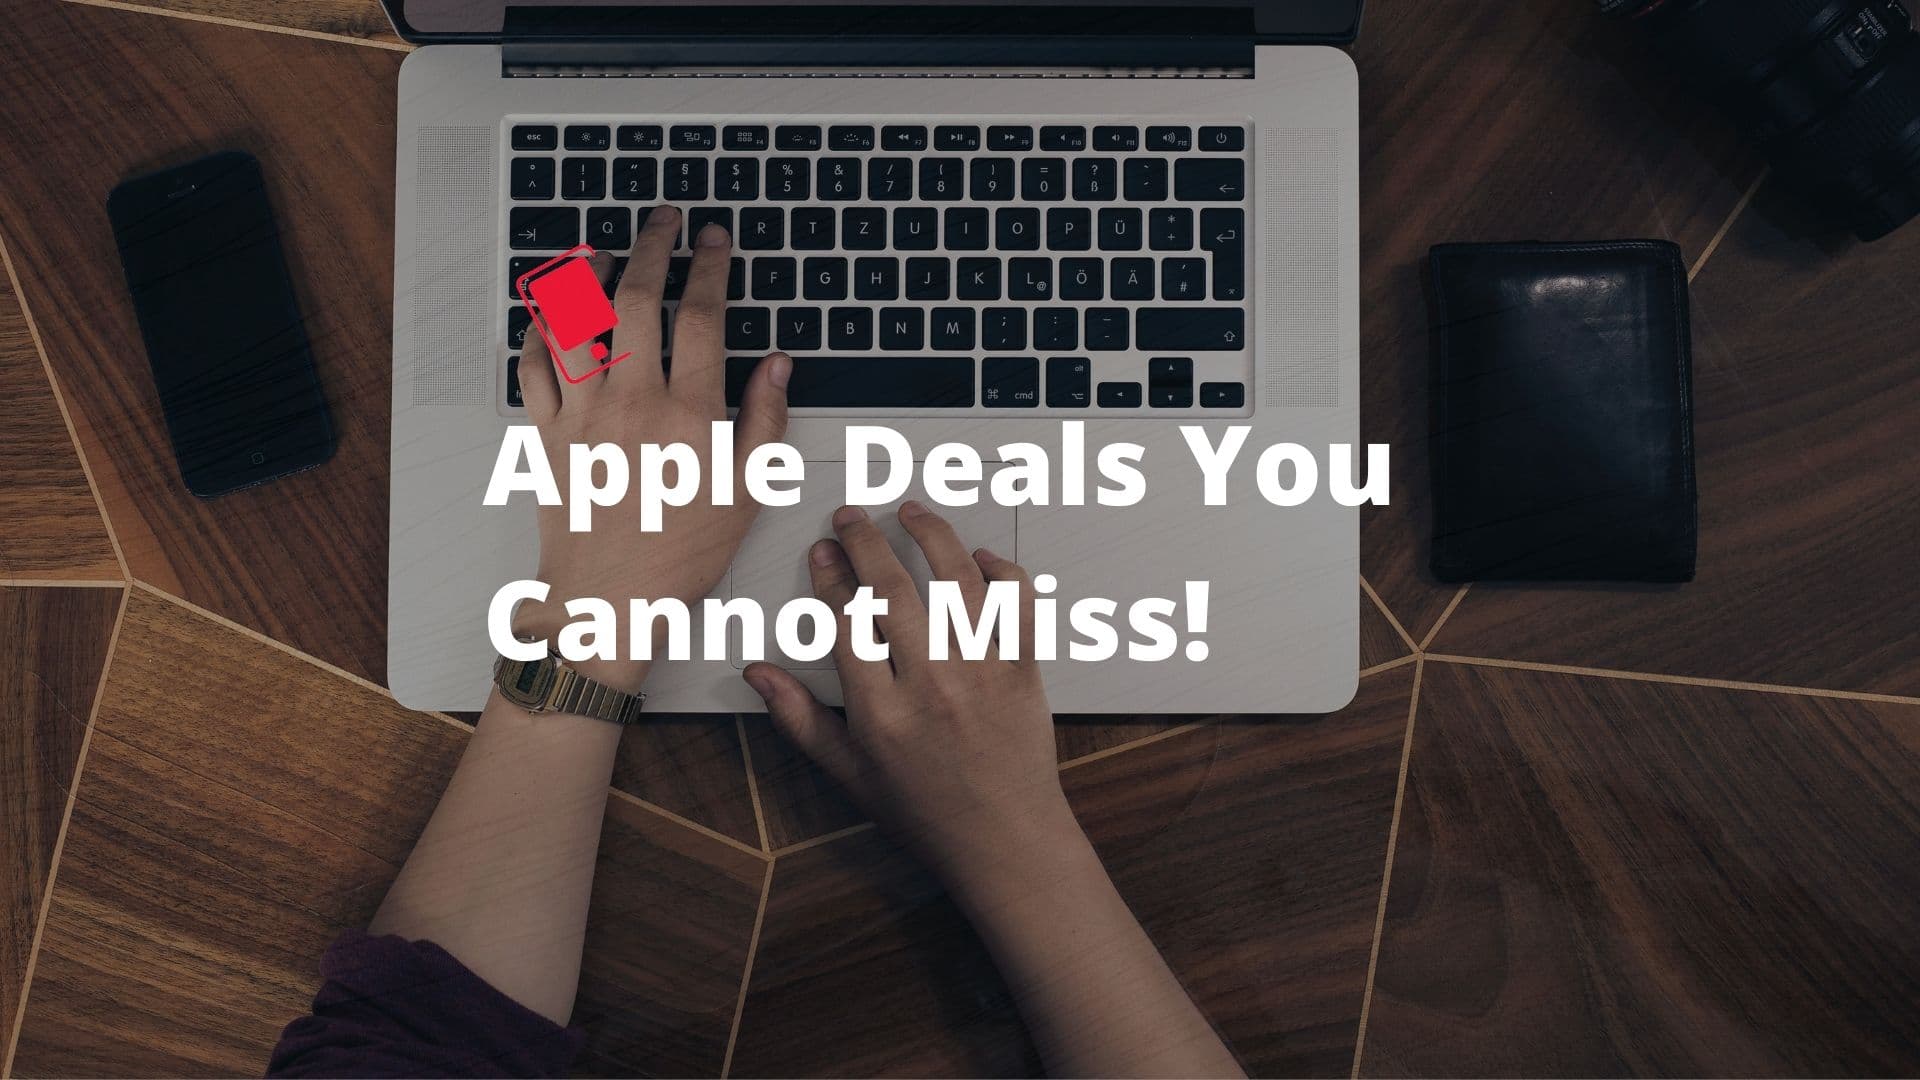 Best Pre-Black Friday Deals on Apple Products